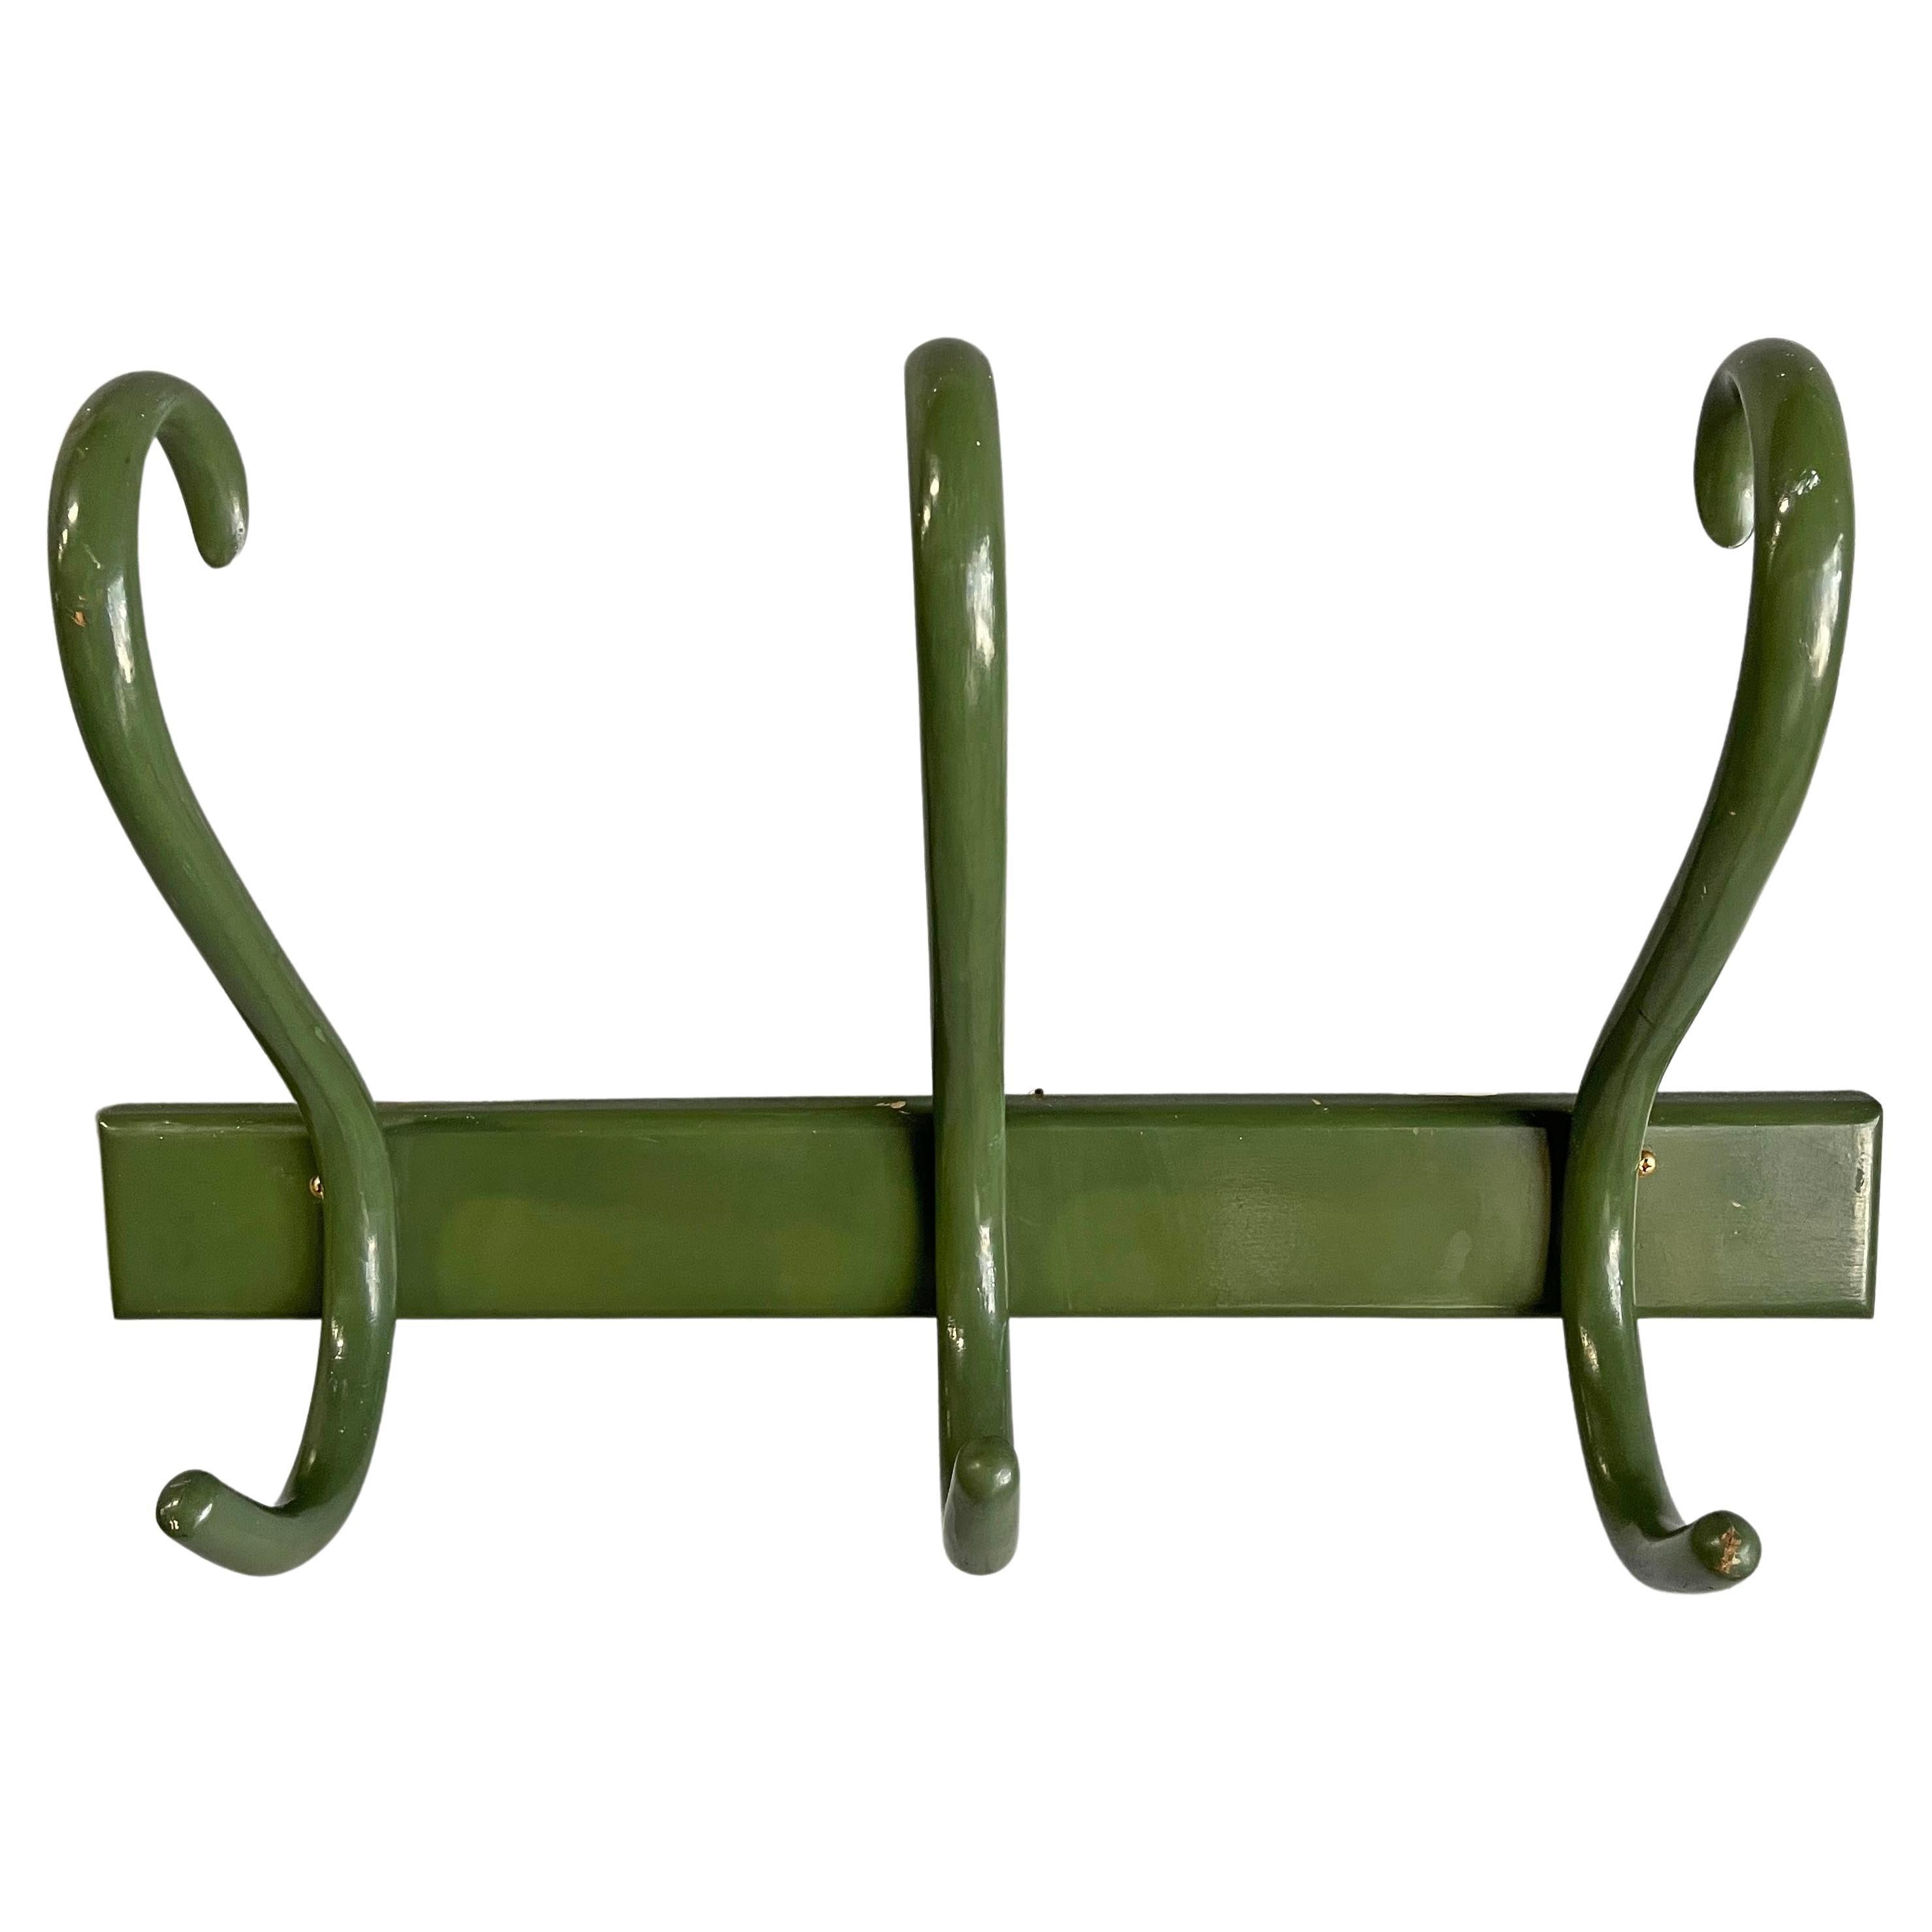 Isamu Kenmochi, Akita Mokko Co., Ltd.
Geat form on this painted green bent wood coat rack. This is a rare item for collectors and design enthusiast. Free shipping inside the continental U.S